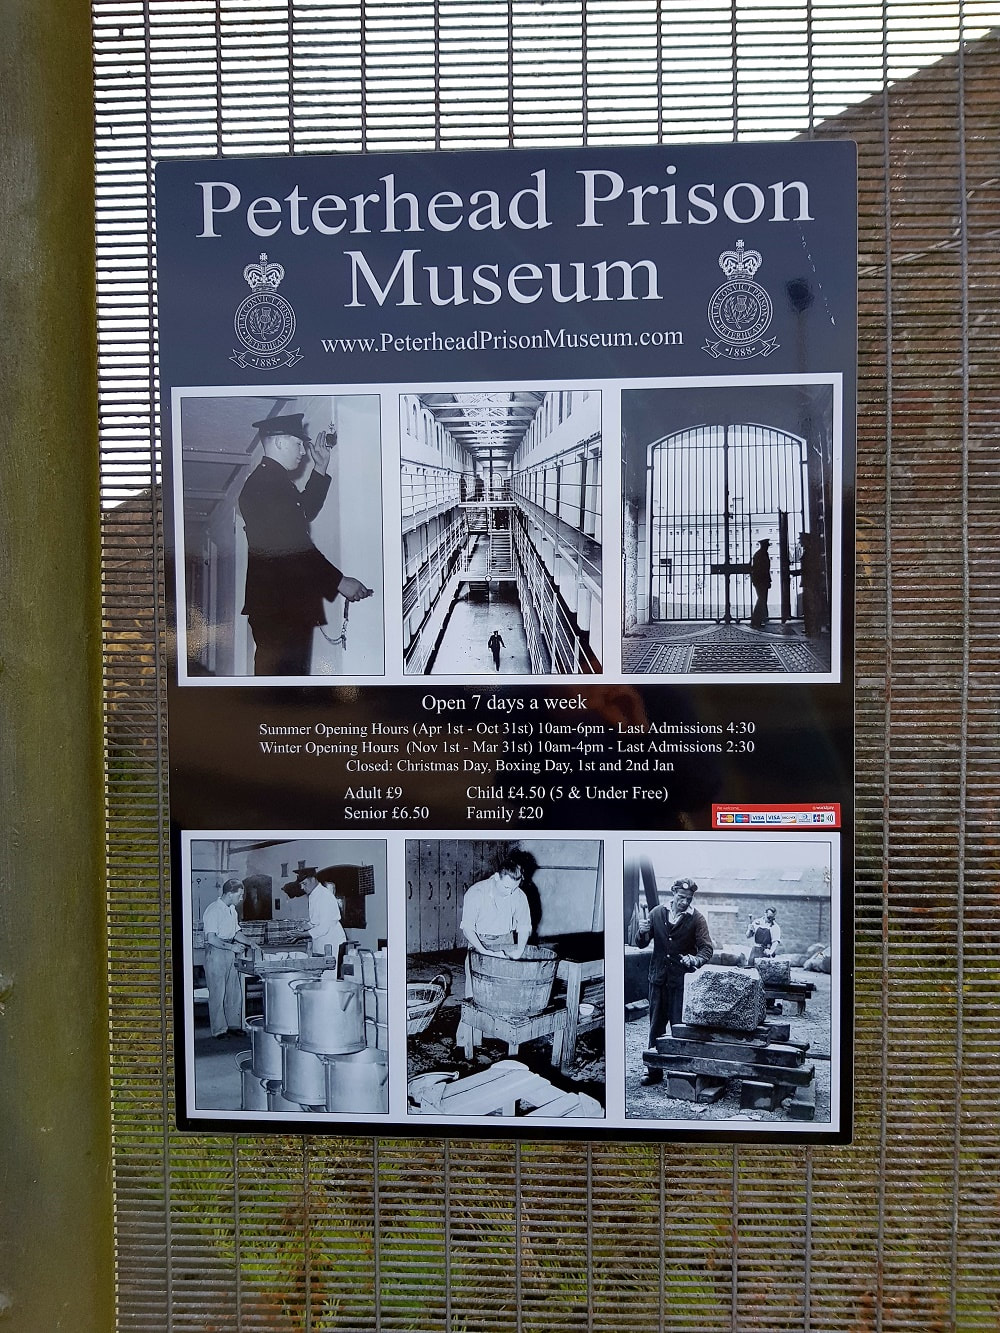 A black and white sign attached to a gate with details of Peterhead Prison Museum opening times and entry costs